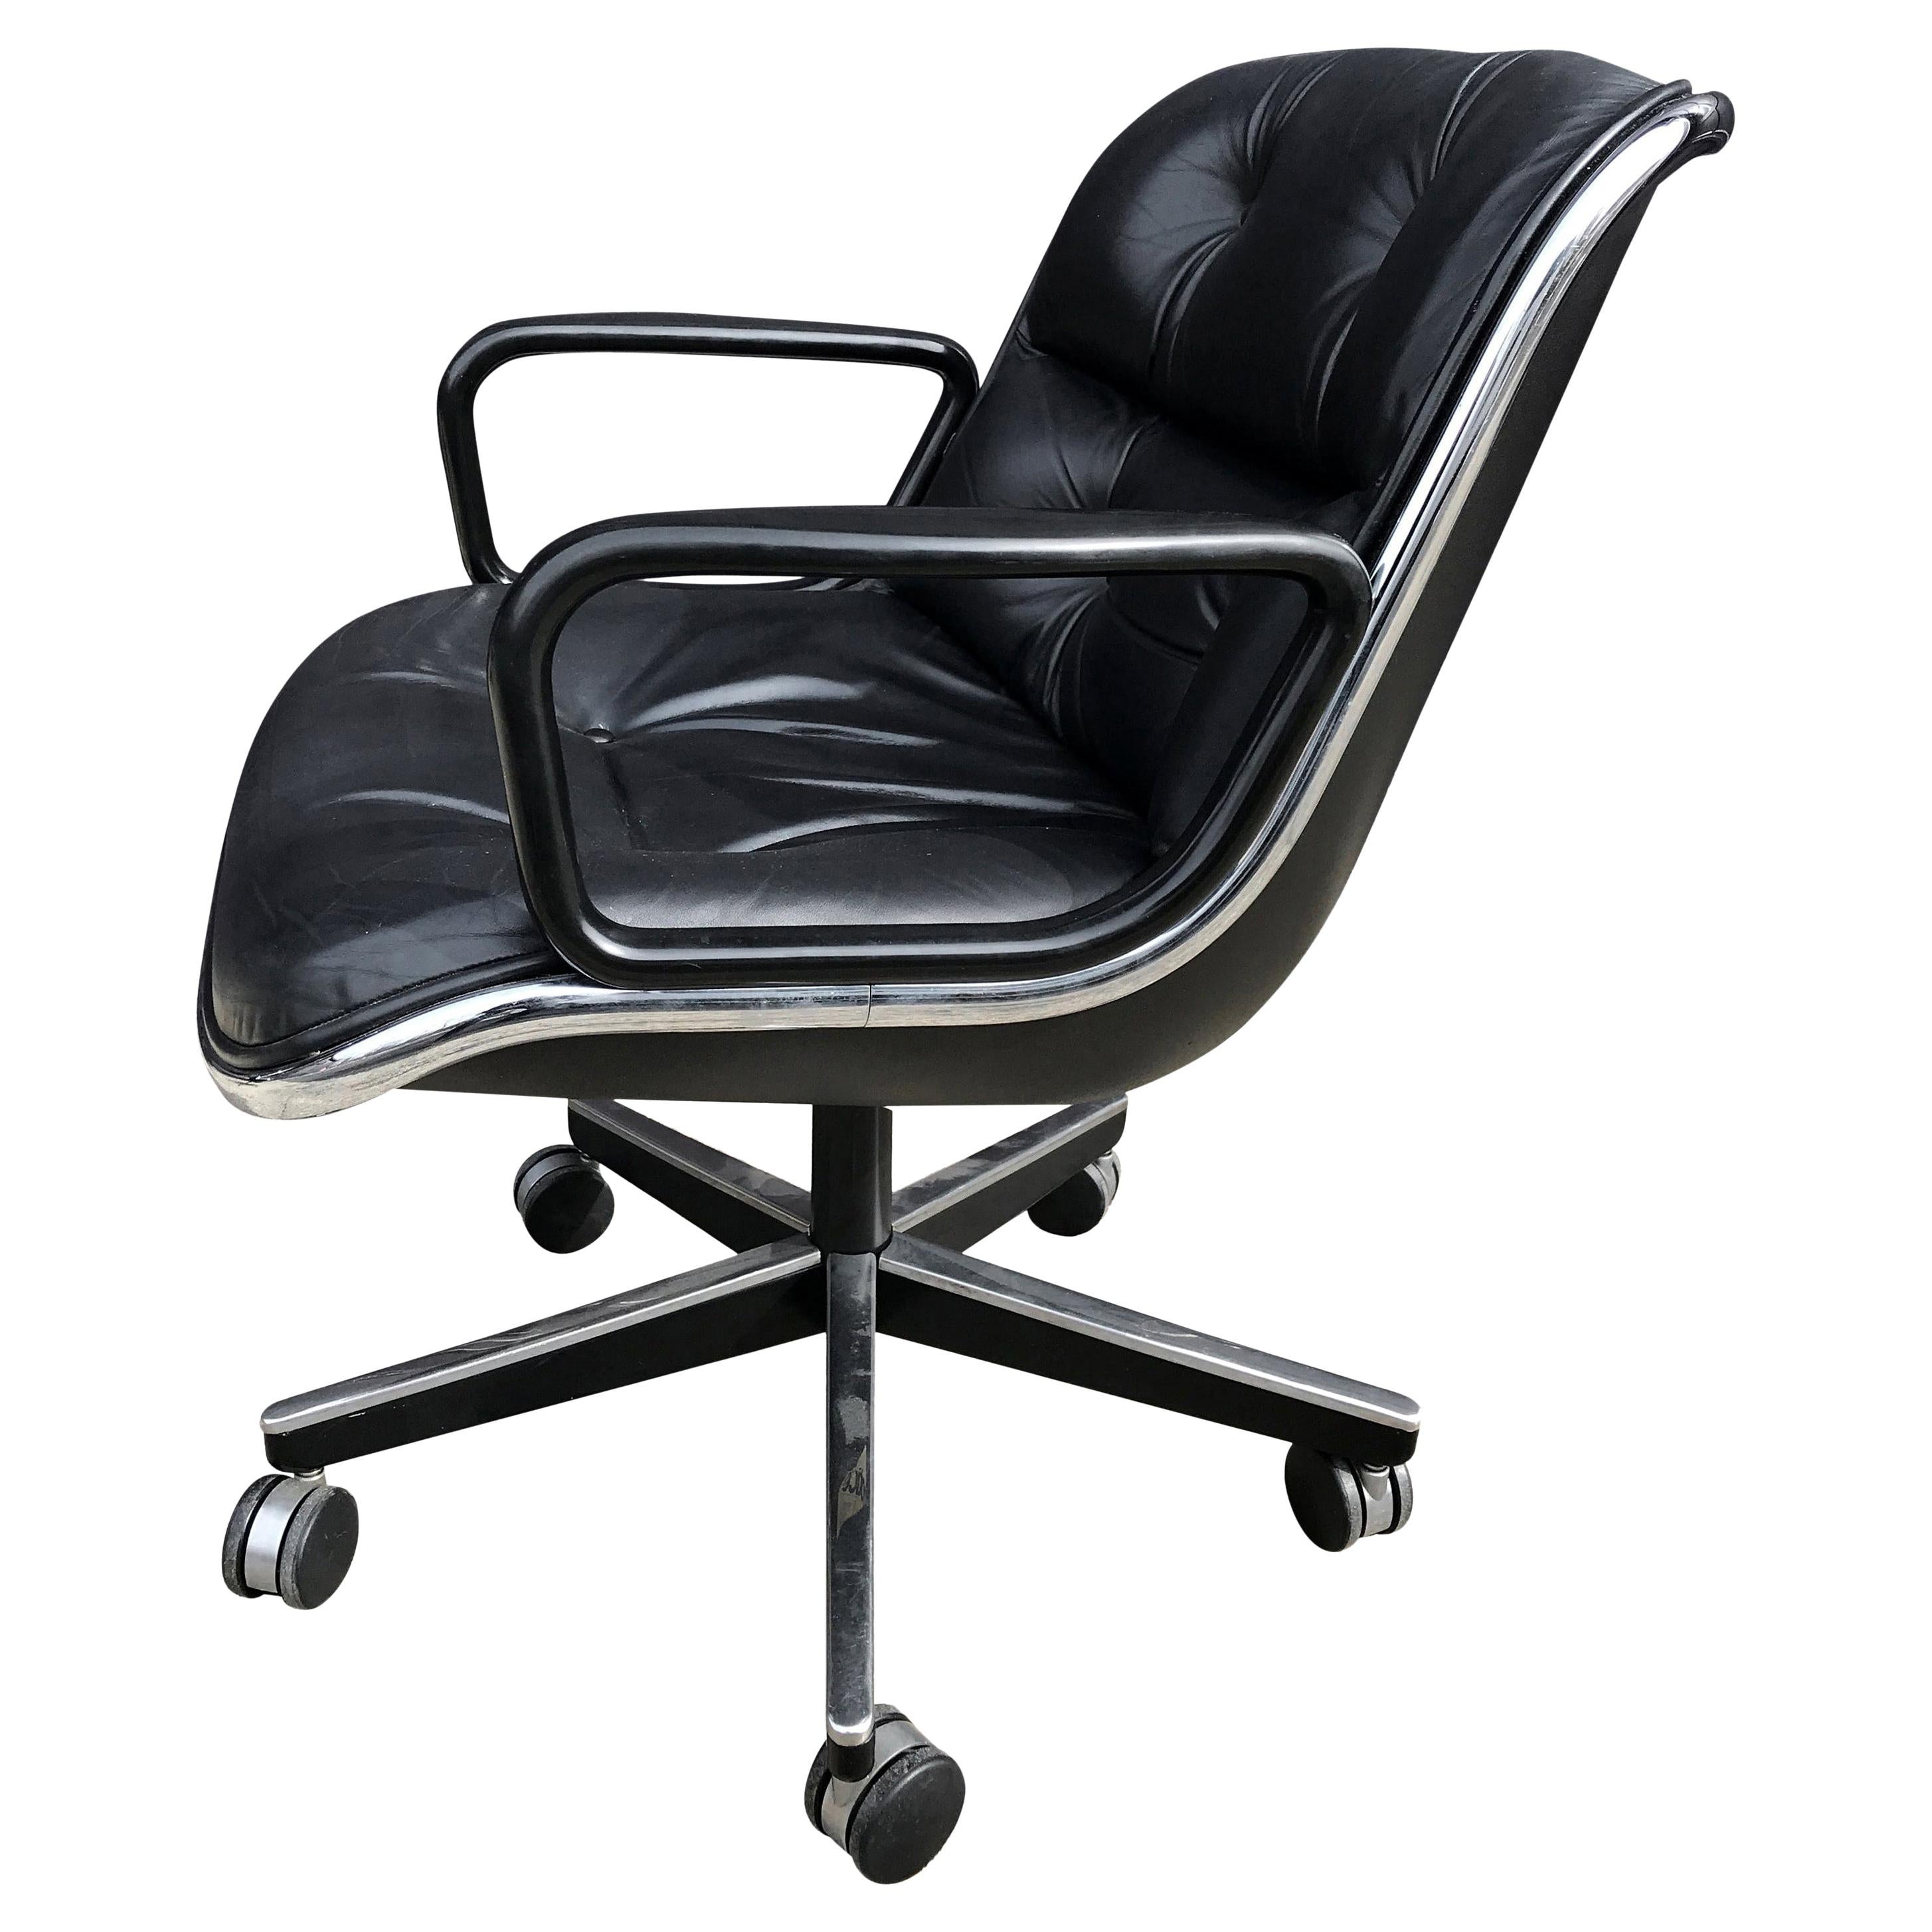 Charles Pollock Leather Desk Chair for Knoll